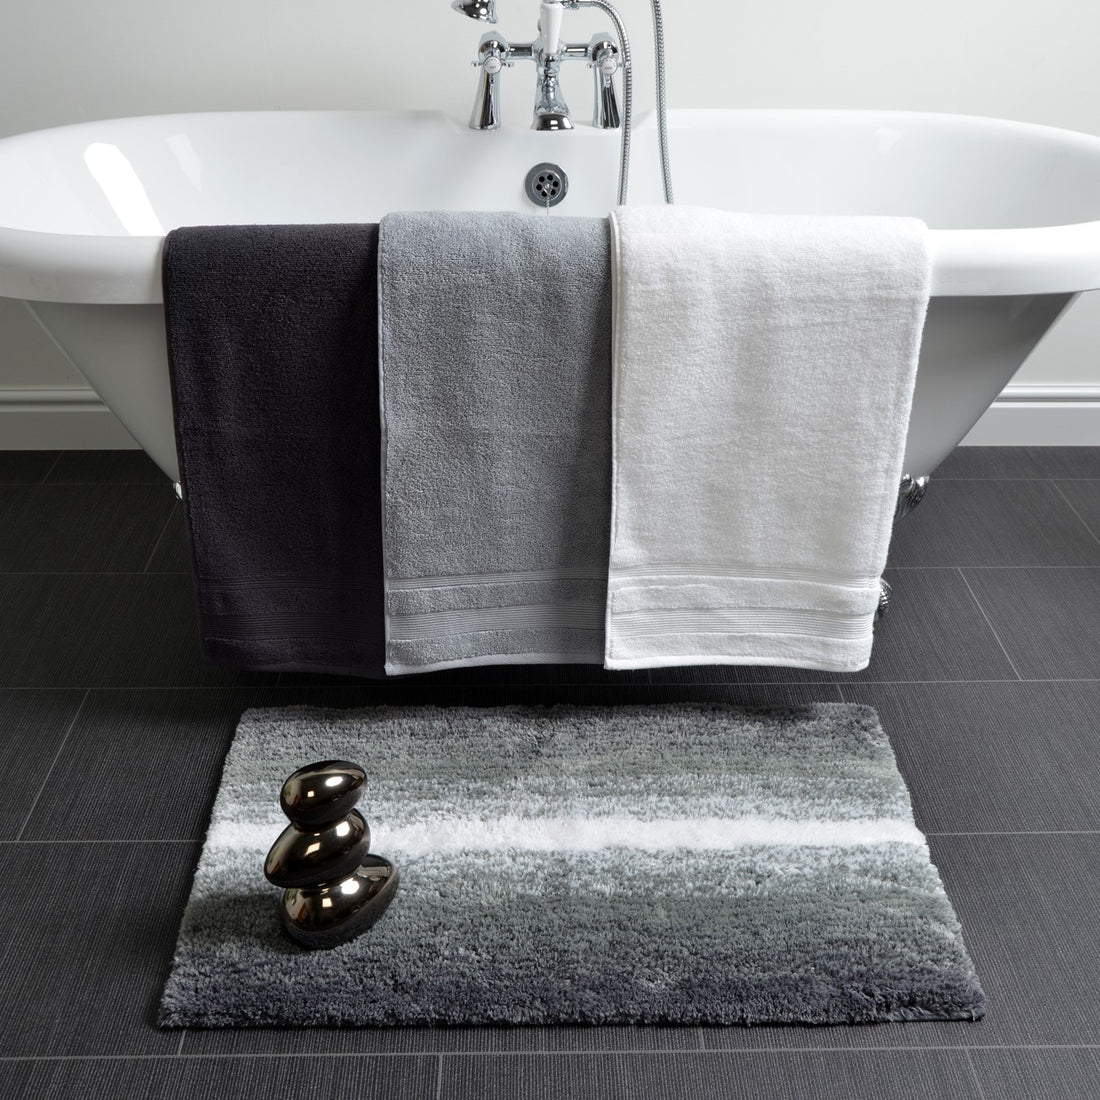 Clearance Sale  Up to 70% off Luxury Towels, Bath Mats & Throws – Allure  Bath Fashions